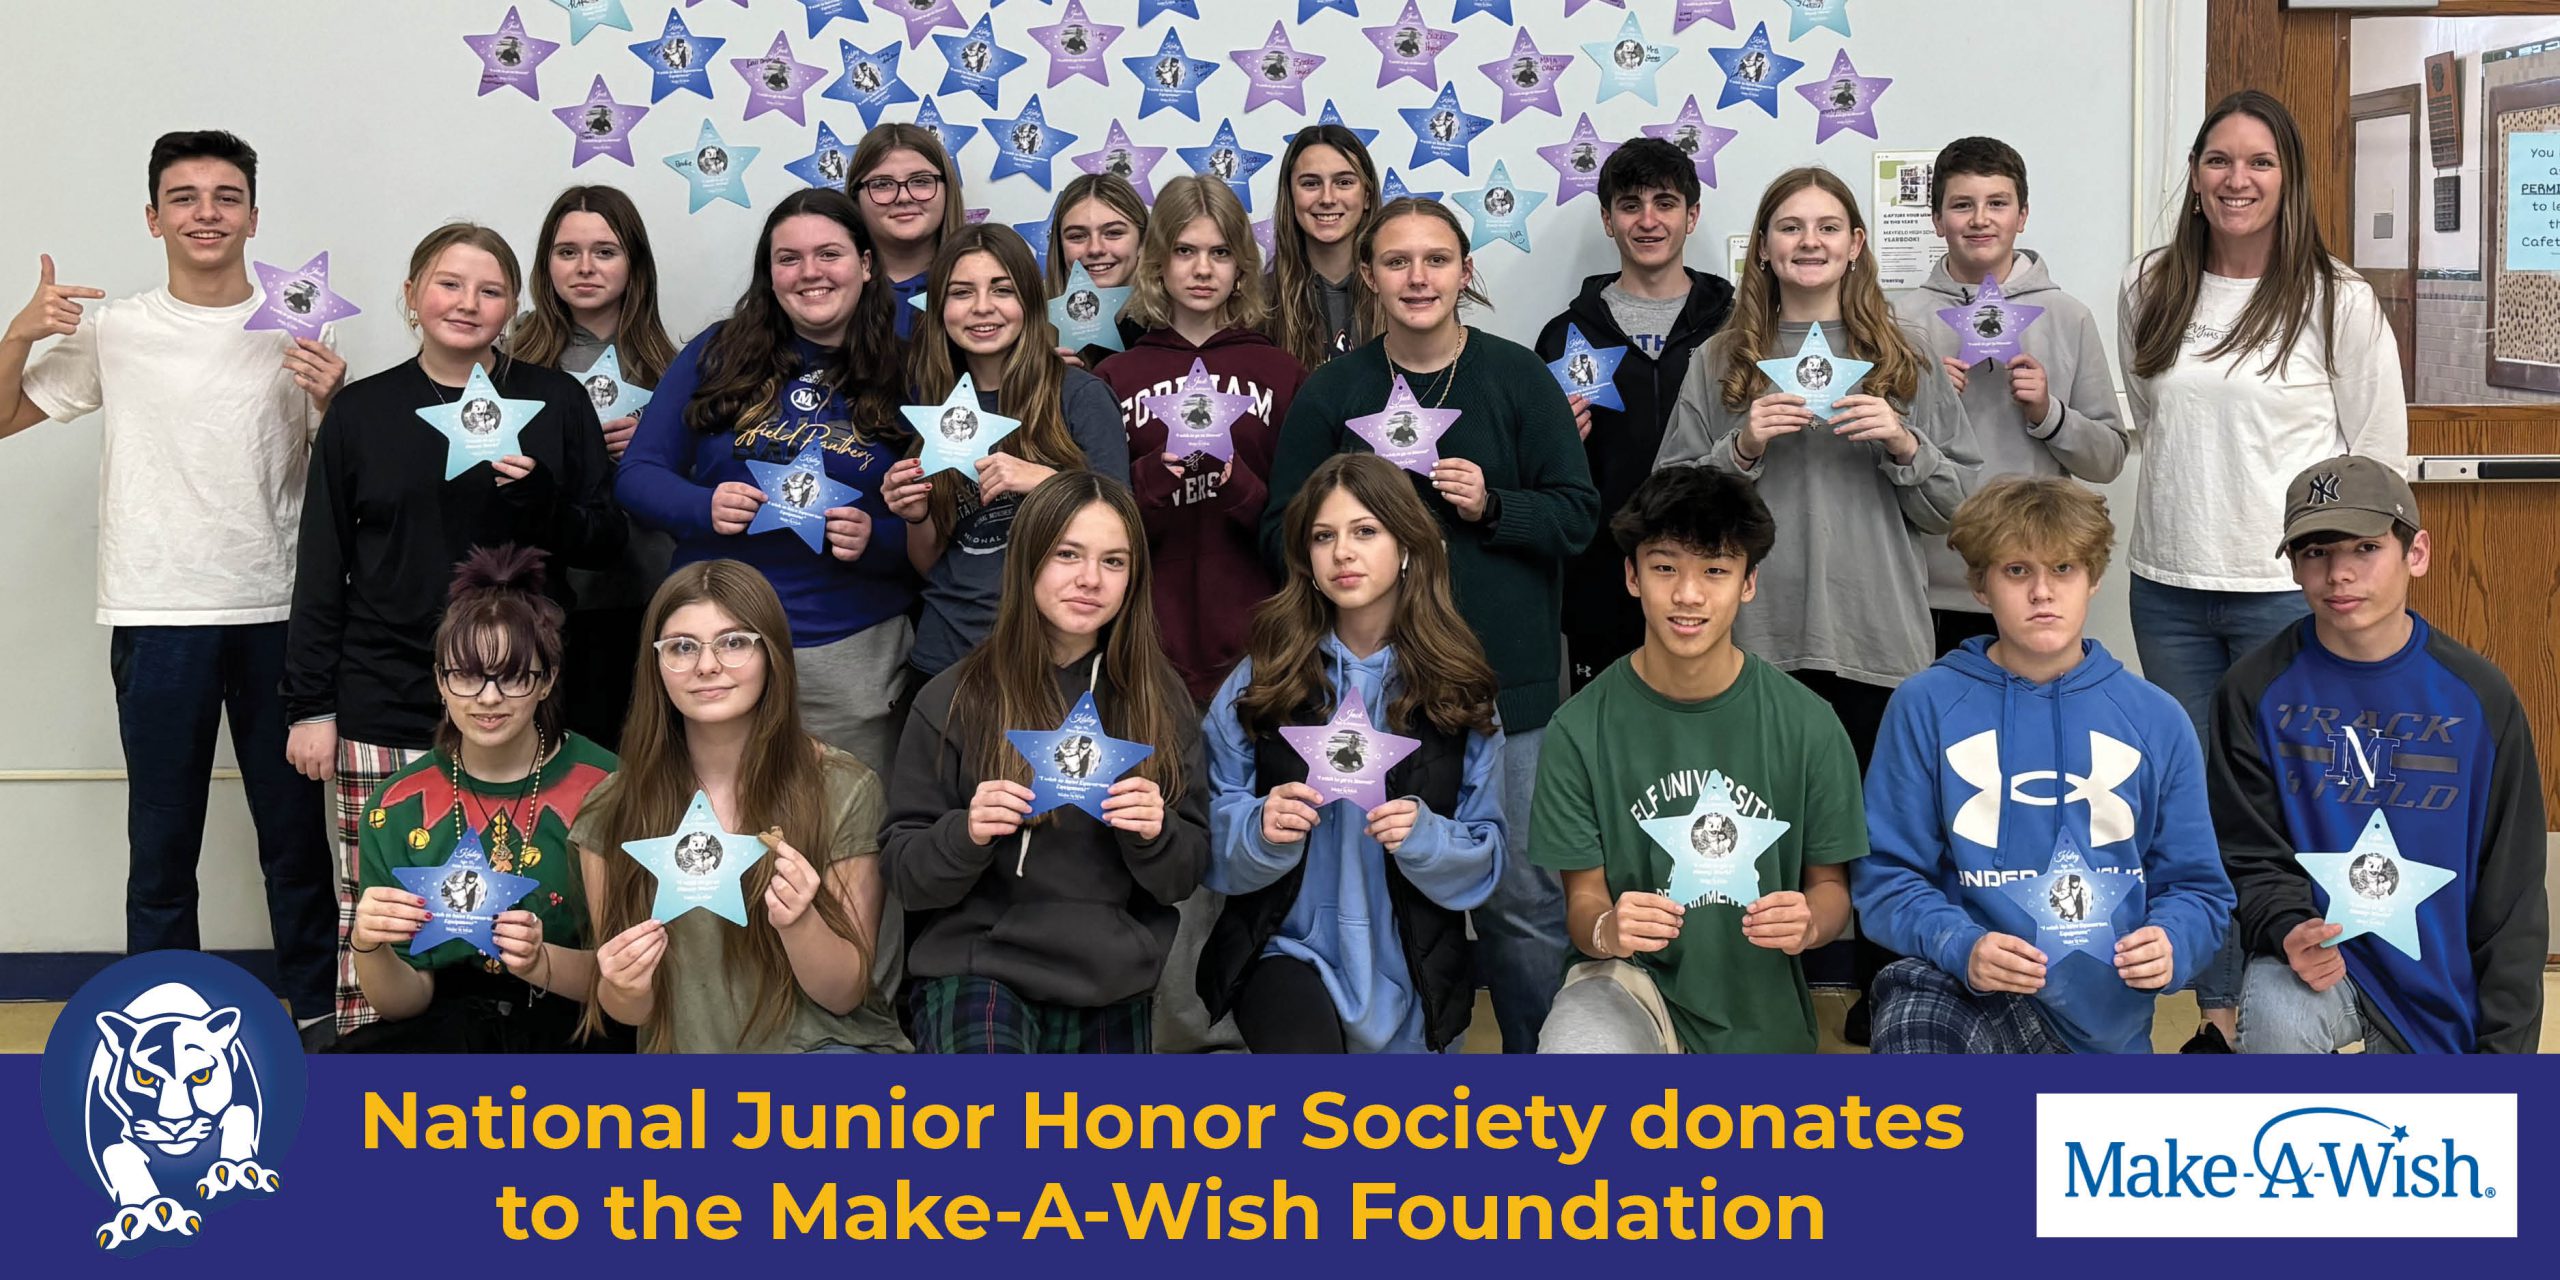 Students stand in three rows holding stars to represent their donation. The Mayfield Panther logo and Make-A-Wish logo are at the bottom in a blue bar with text saying National Junior Honor Society donates to Make-A-Wish Foundation.